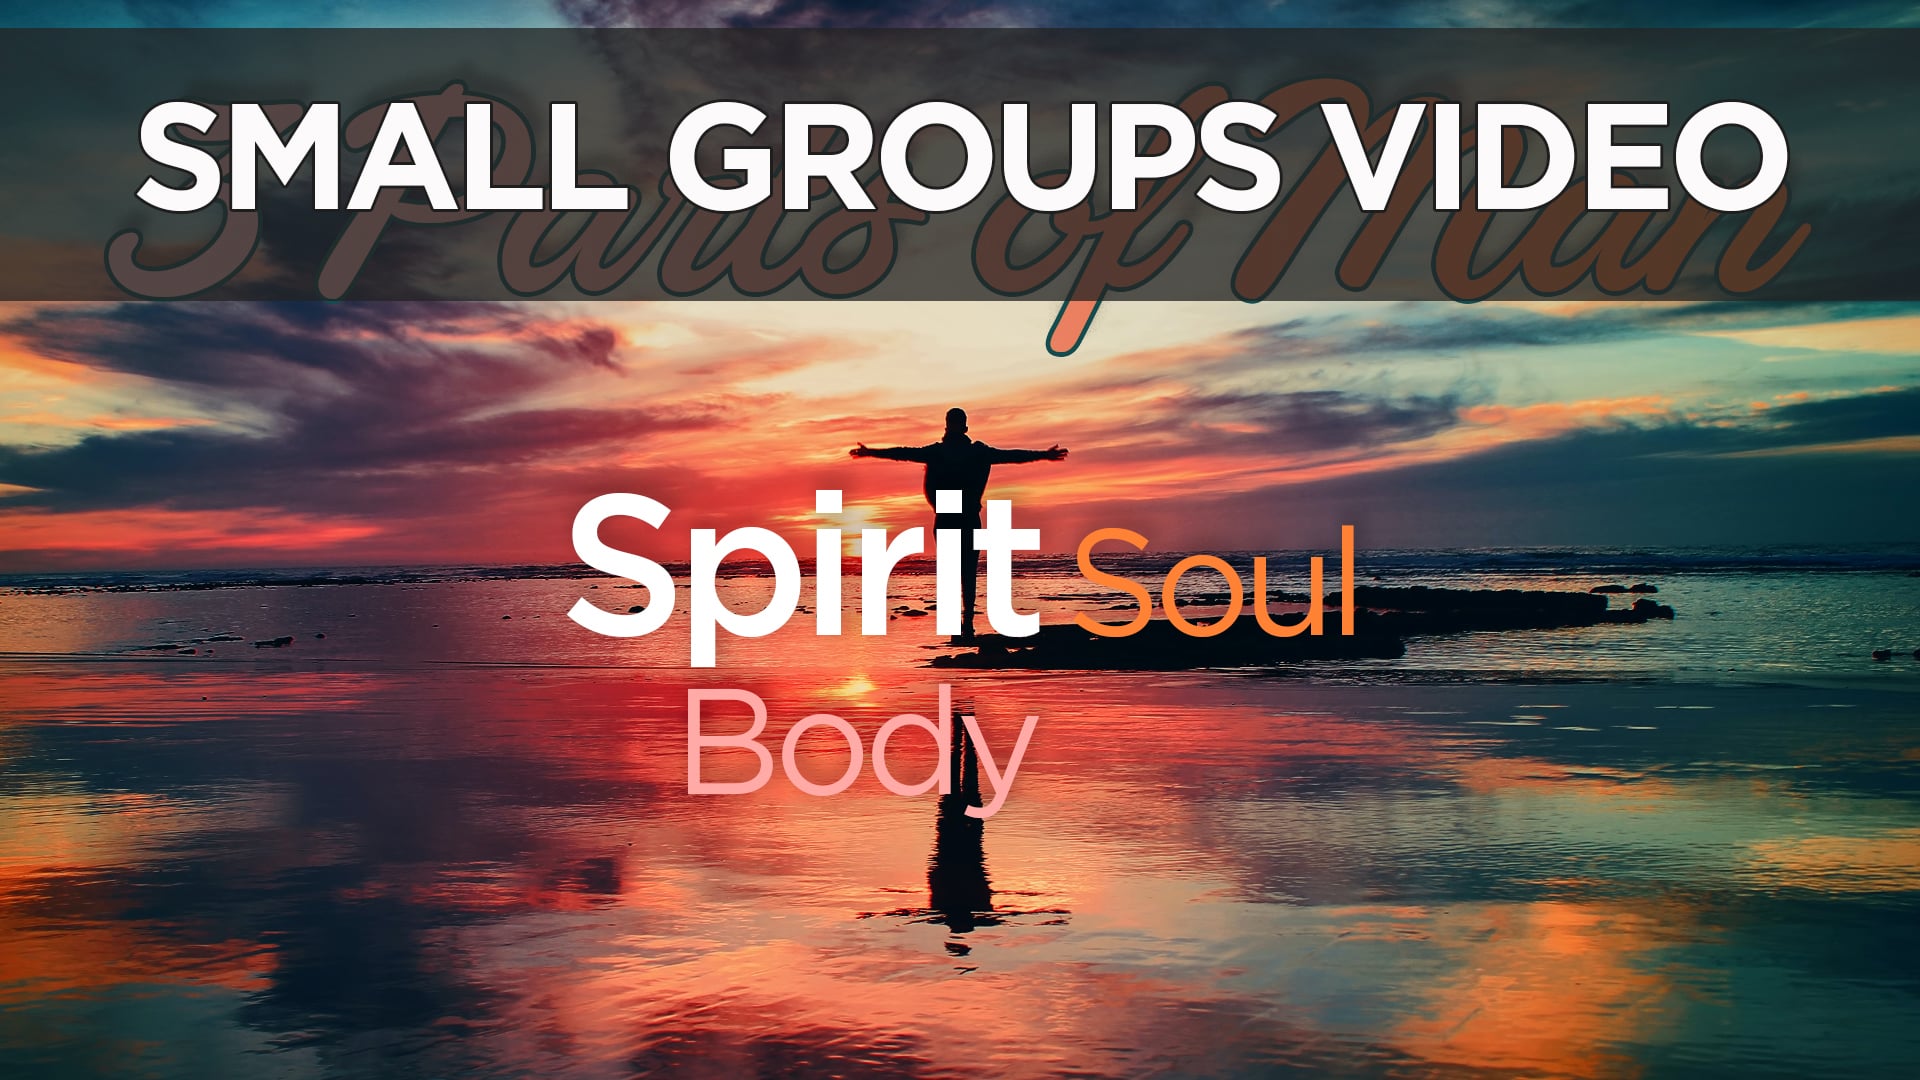 Small Group Videos - 6 Weeks of Body, Soul, Spirit - Session 6